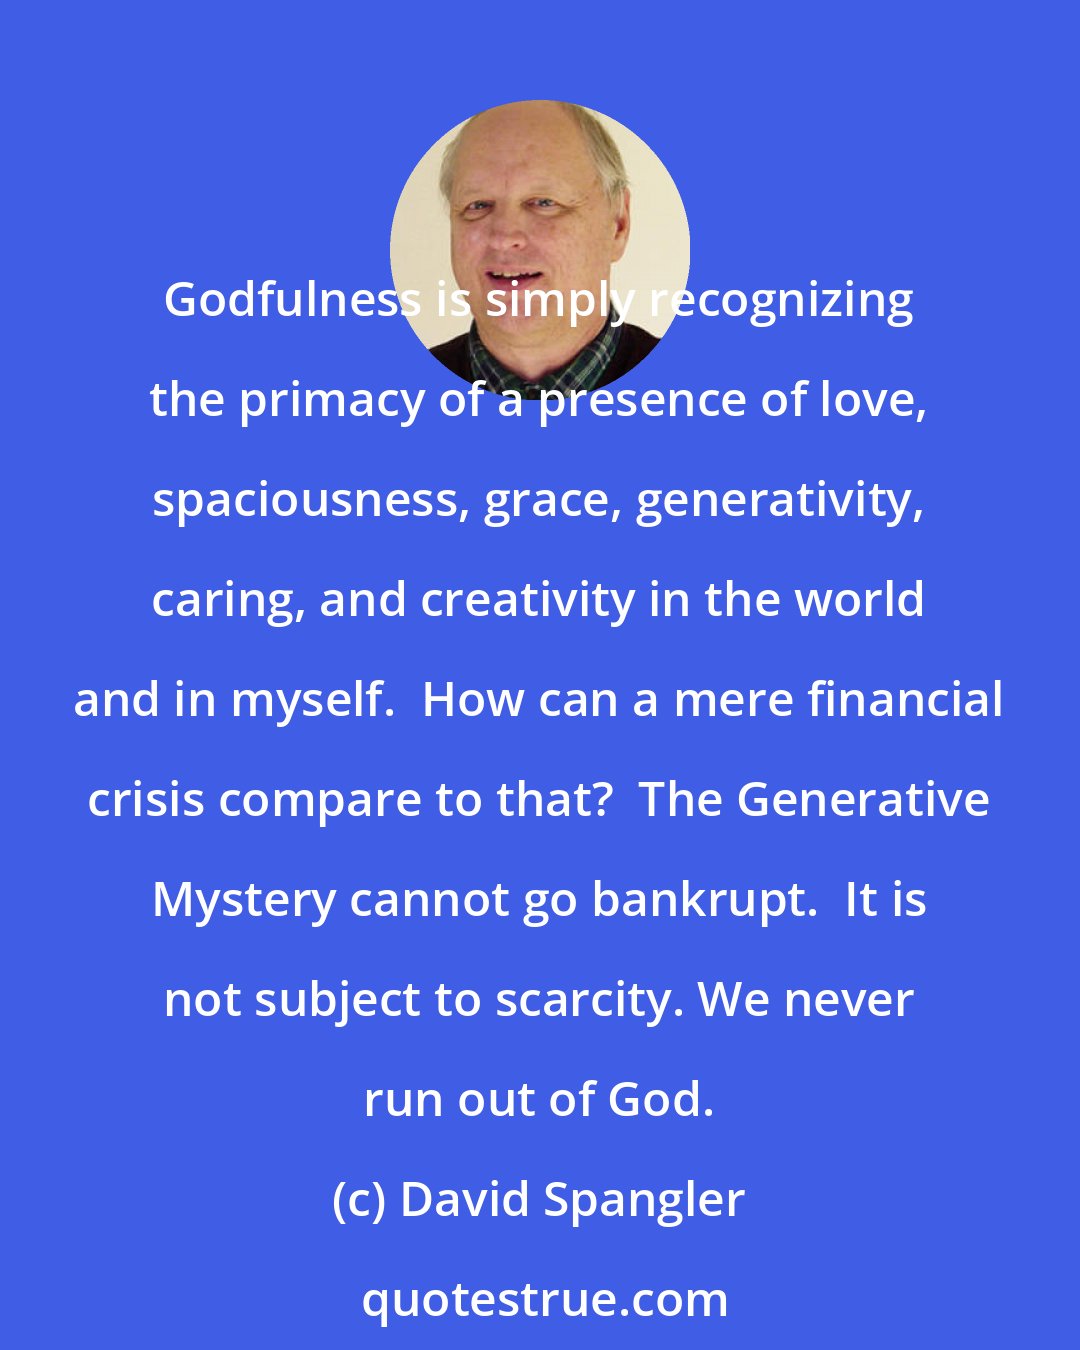 David Spangler: Godfulness is simply recognizing the primacy of a presence of love, spaciousness, grace, generativity, caring, and creativity in the world and in myself.  How can a mere financial crisis compare to that?  The Generative Mystery cannot go bankrupt.  It is not subject to scarcity. We never run out of God.